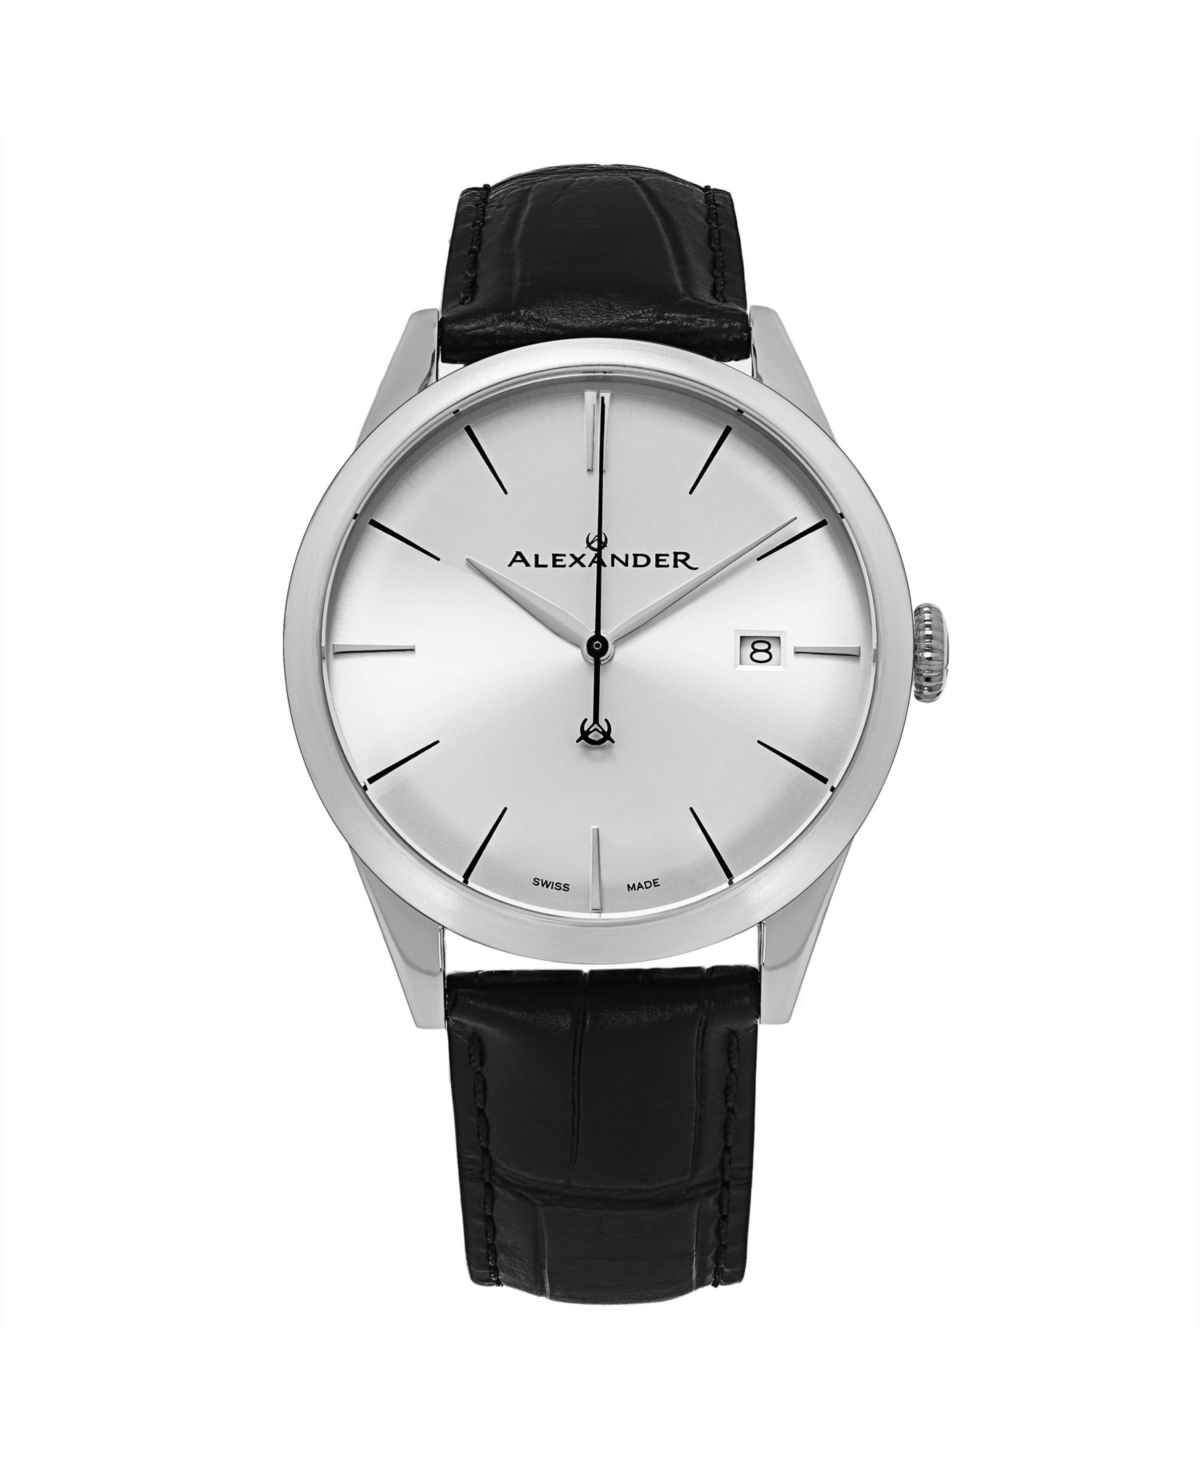 ALEXANDER MEN'S SOPHISTICATE BLACK LEATHER , SILVER-TONE DIAL , 40MM ROUND WATCH